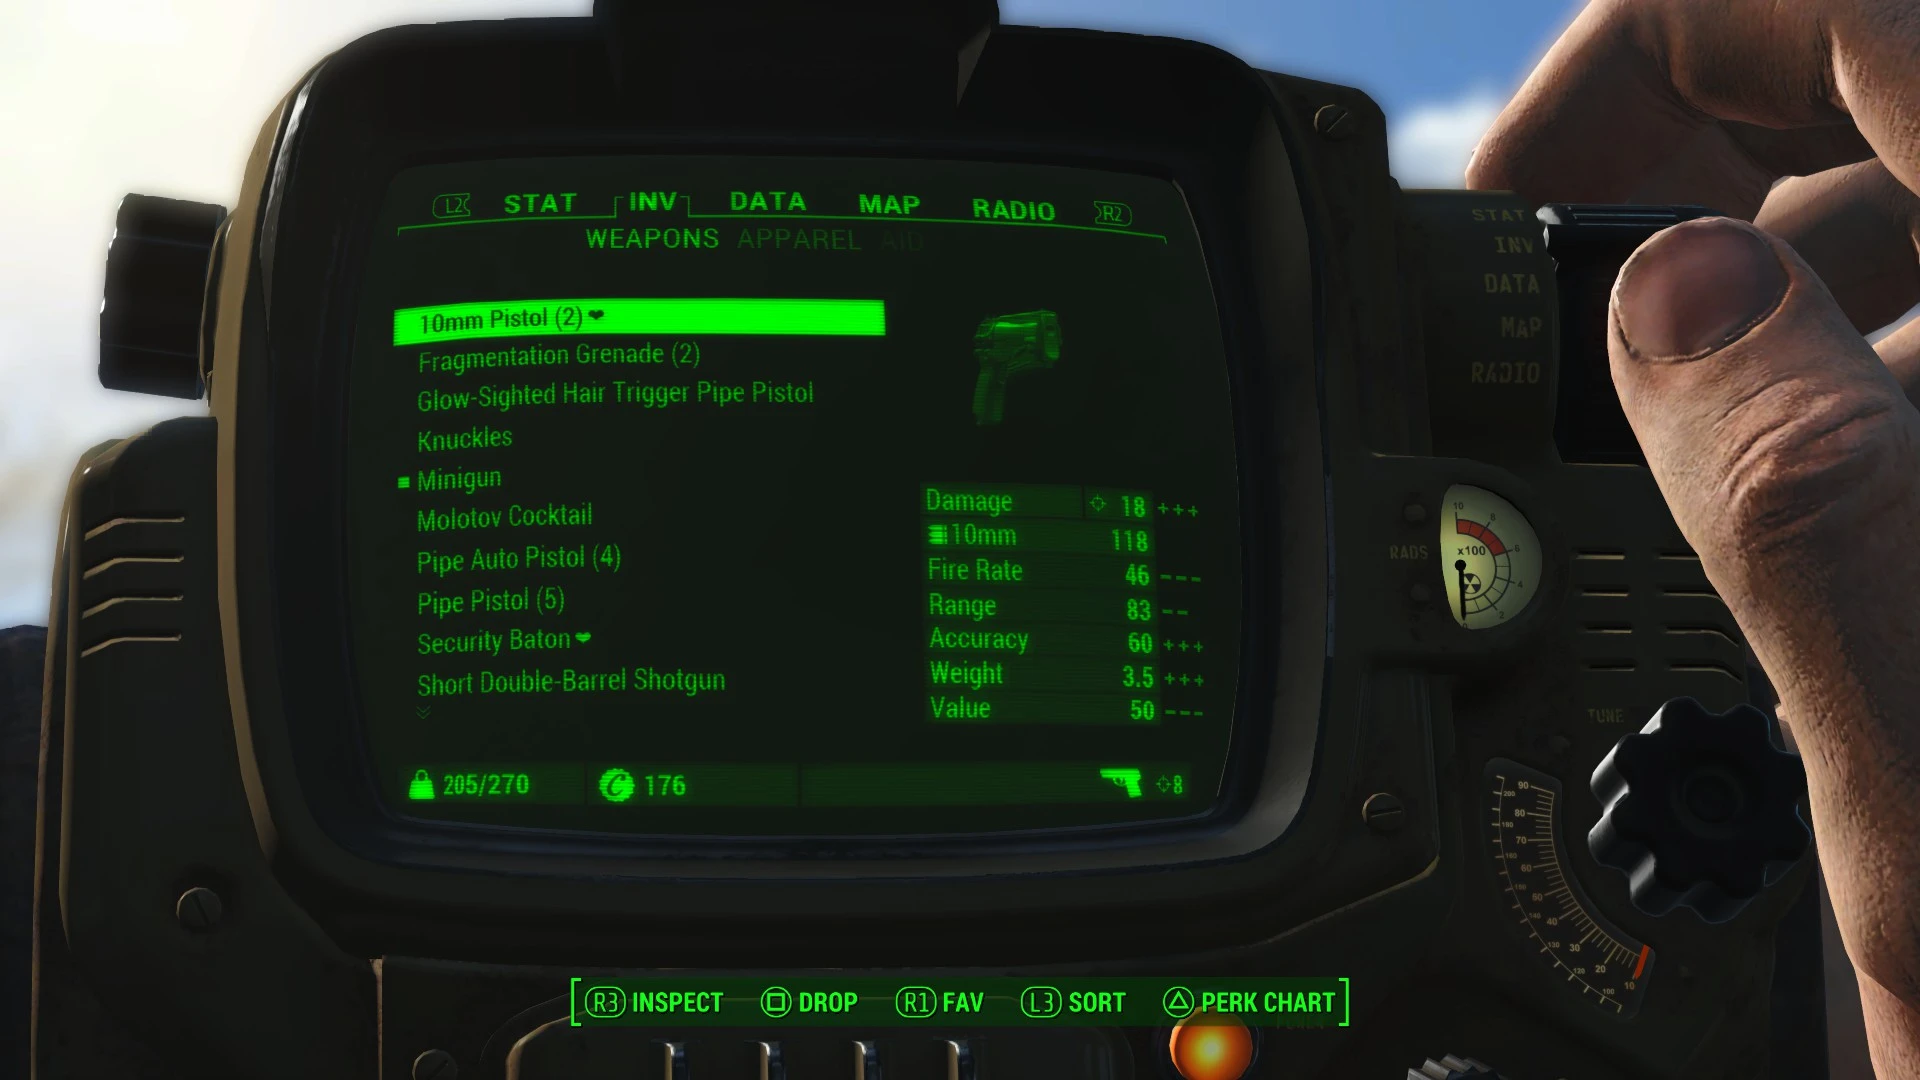 mods for ps4 fallout 4